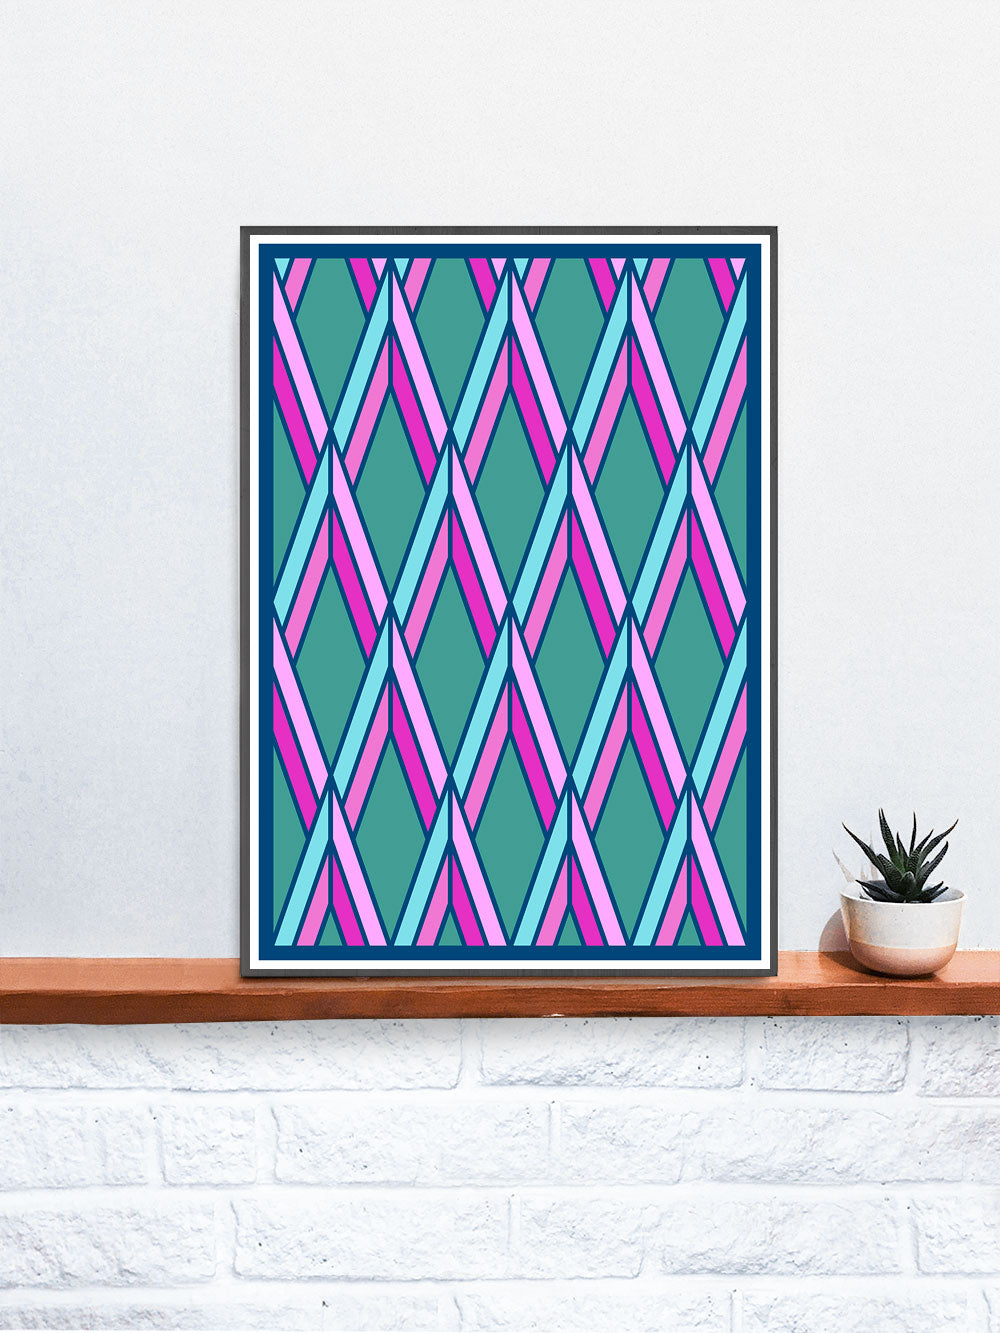 The Candy Stained Glass Graphic Print on a Shelf